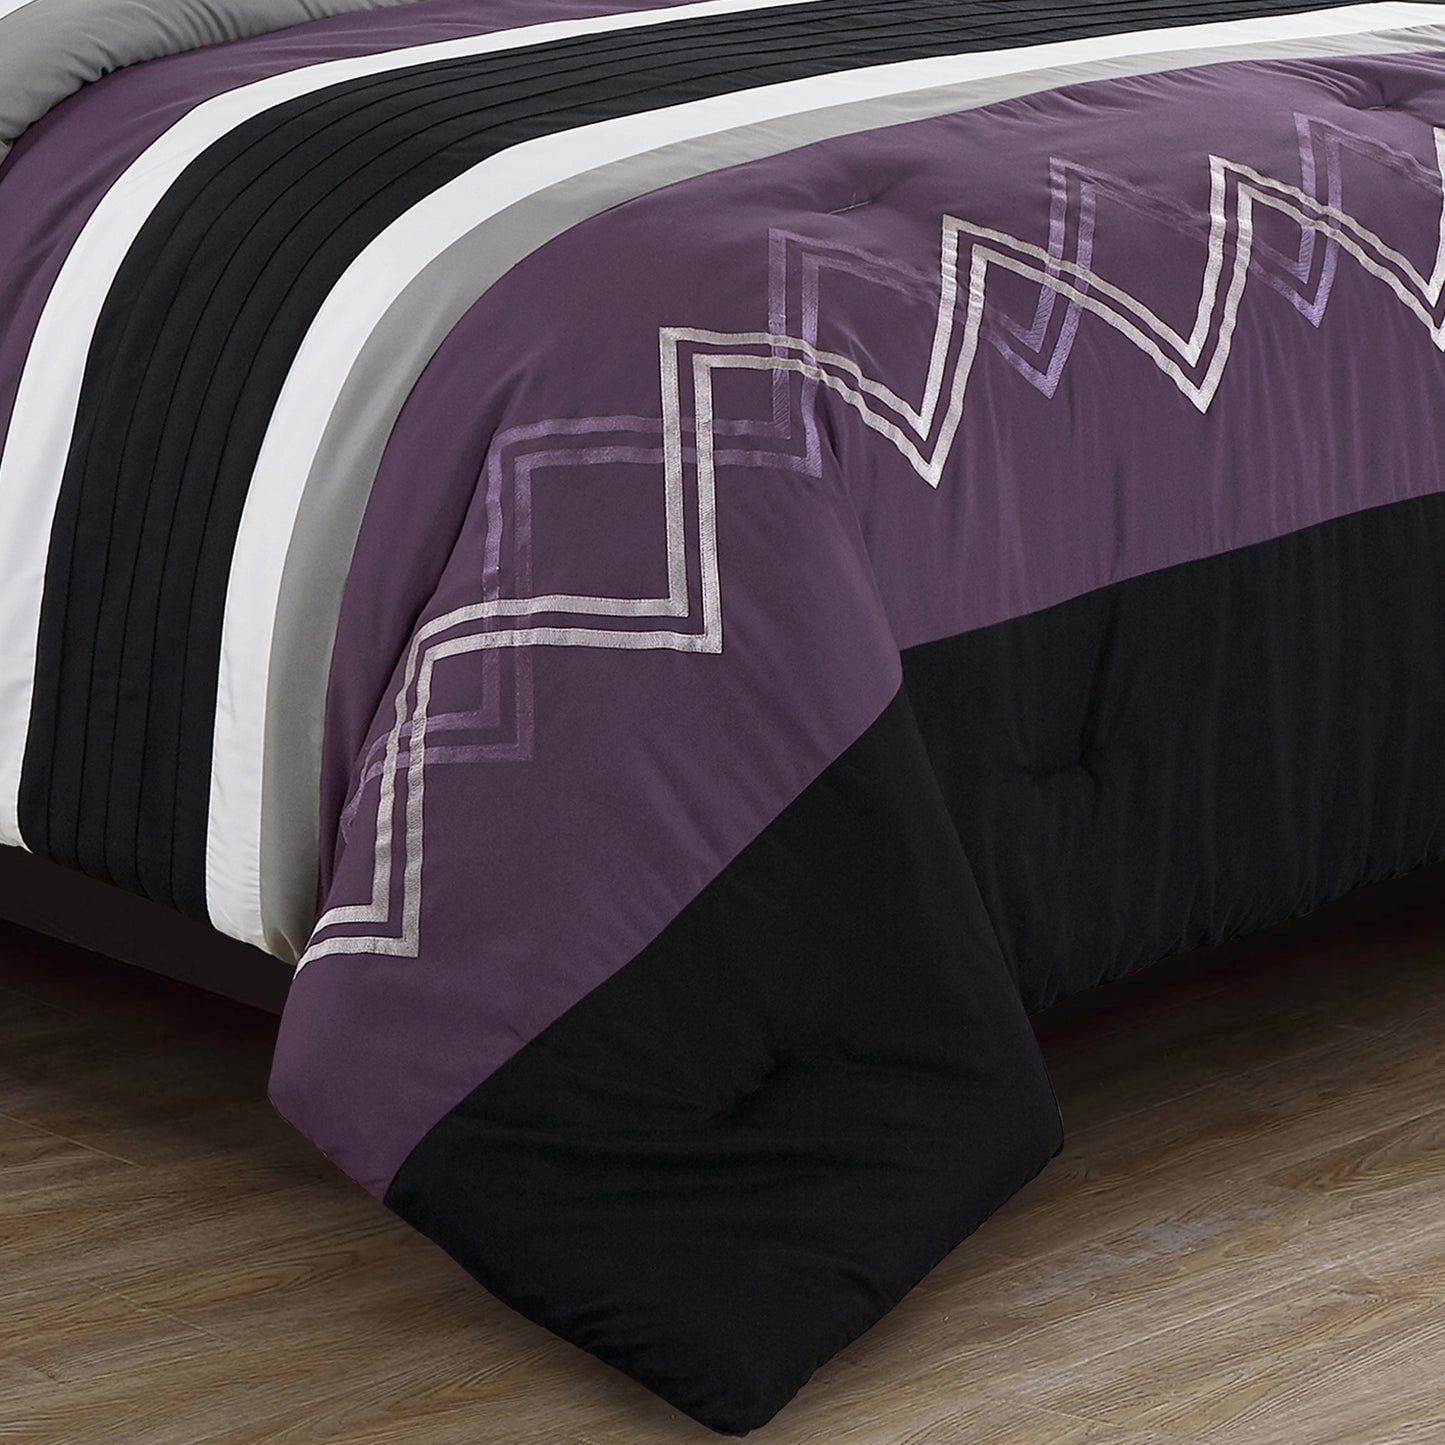 Jaxson 7-Piece Striped Zigzag Embroidery Bed in a Bag Comforter Set